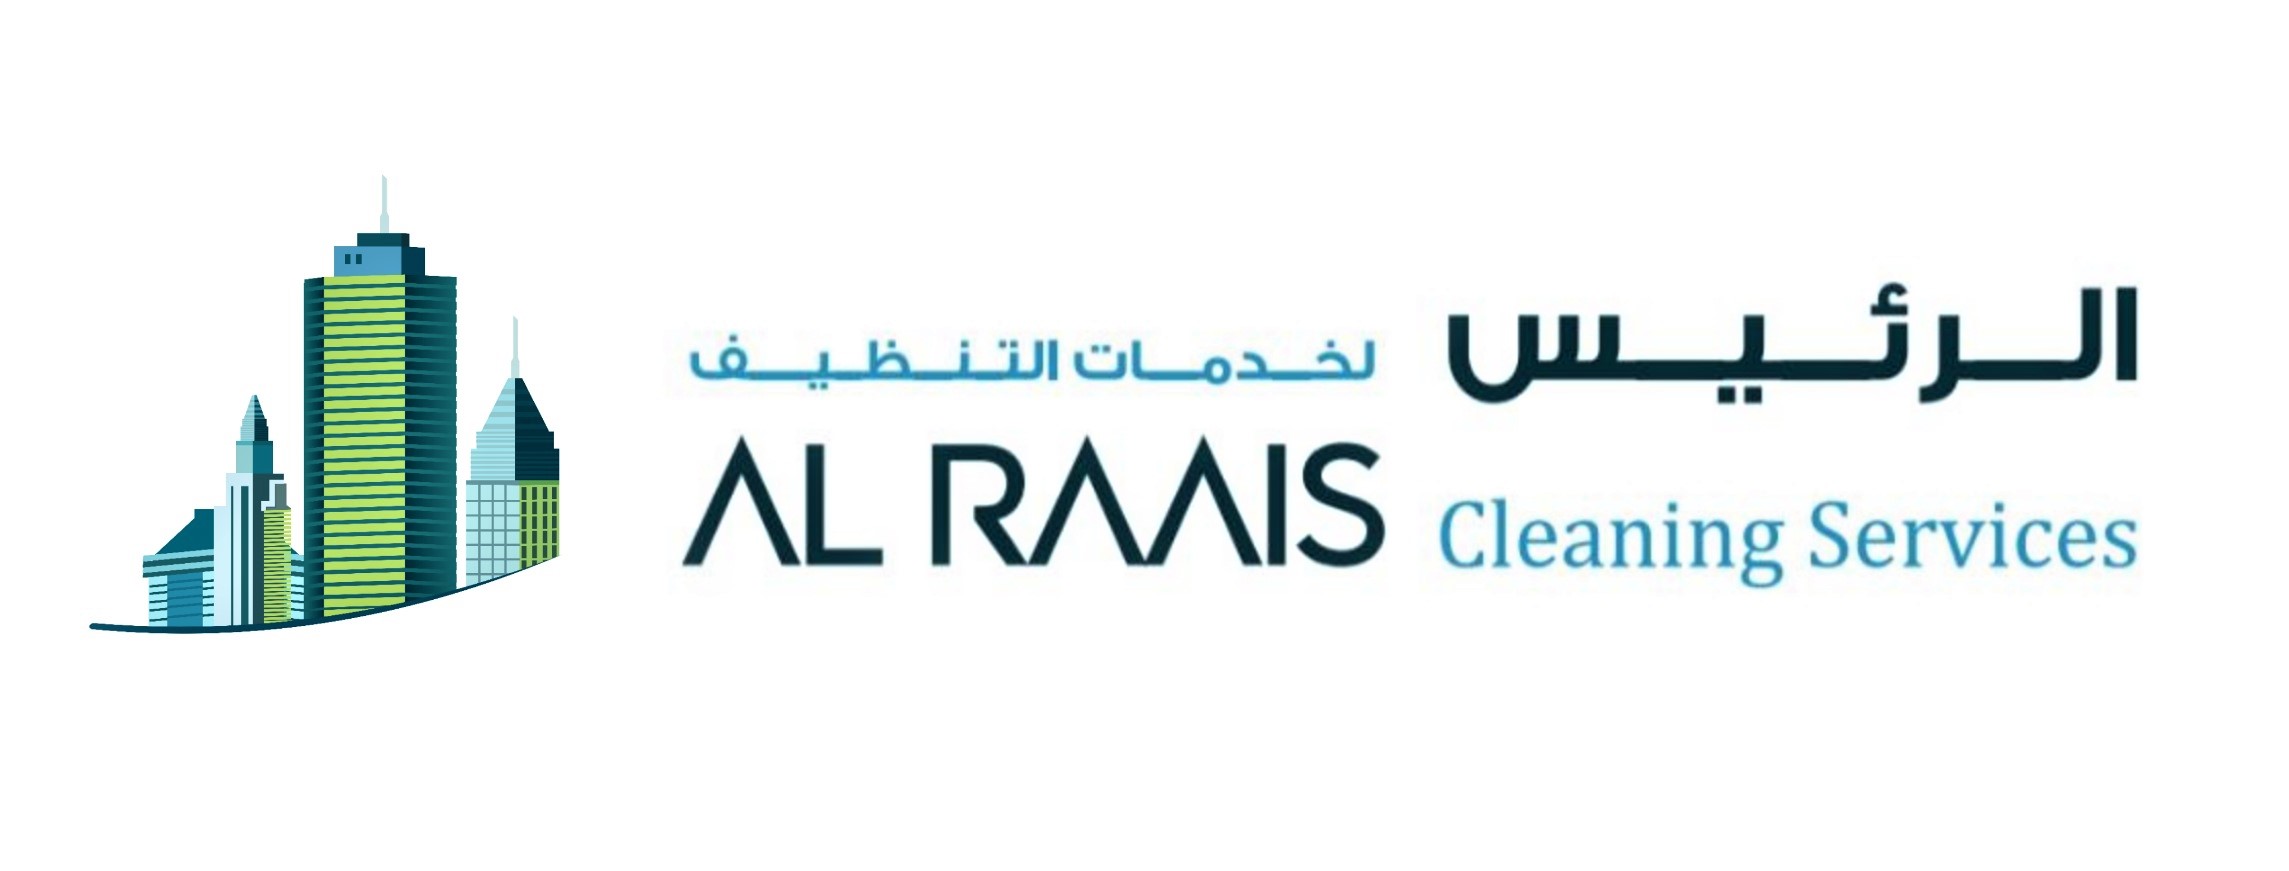 Alraais Cleaning Services